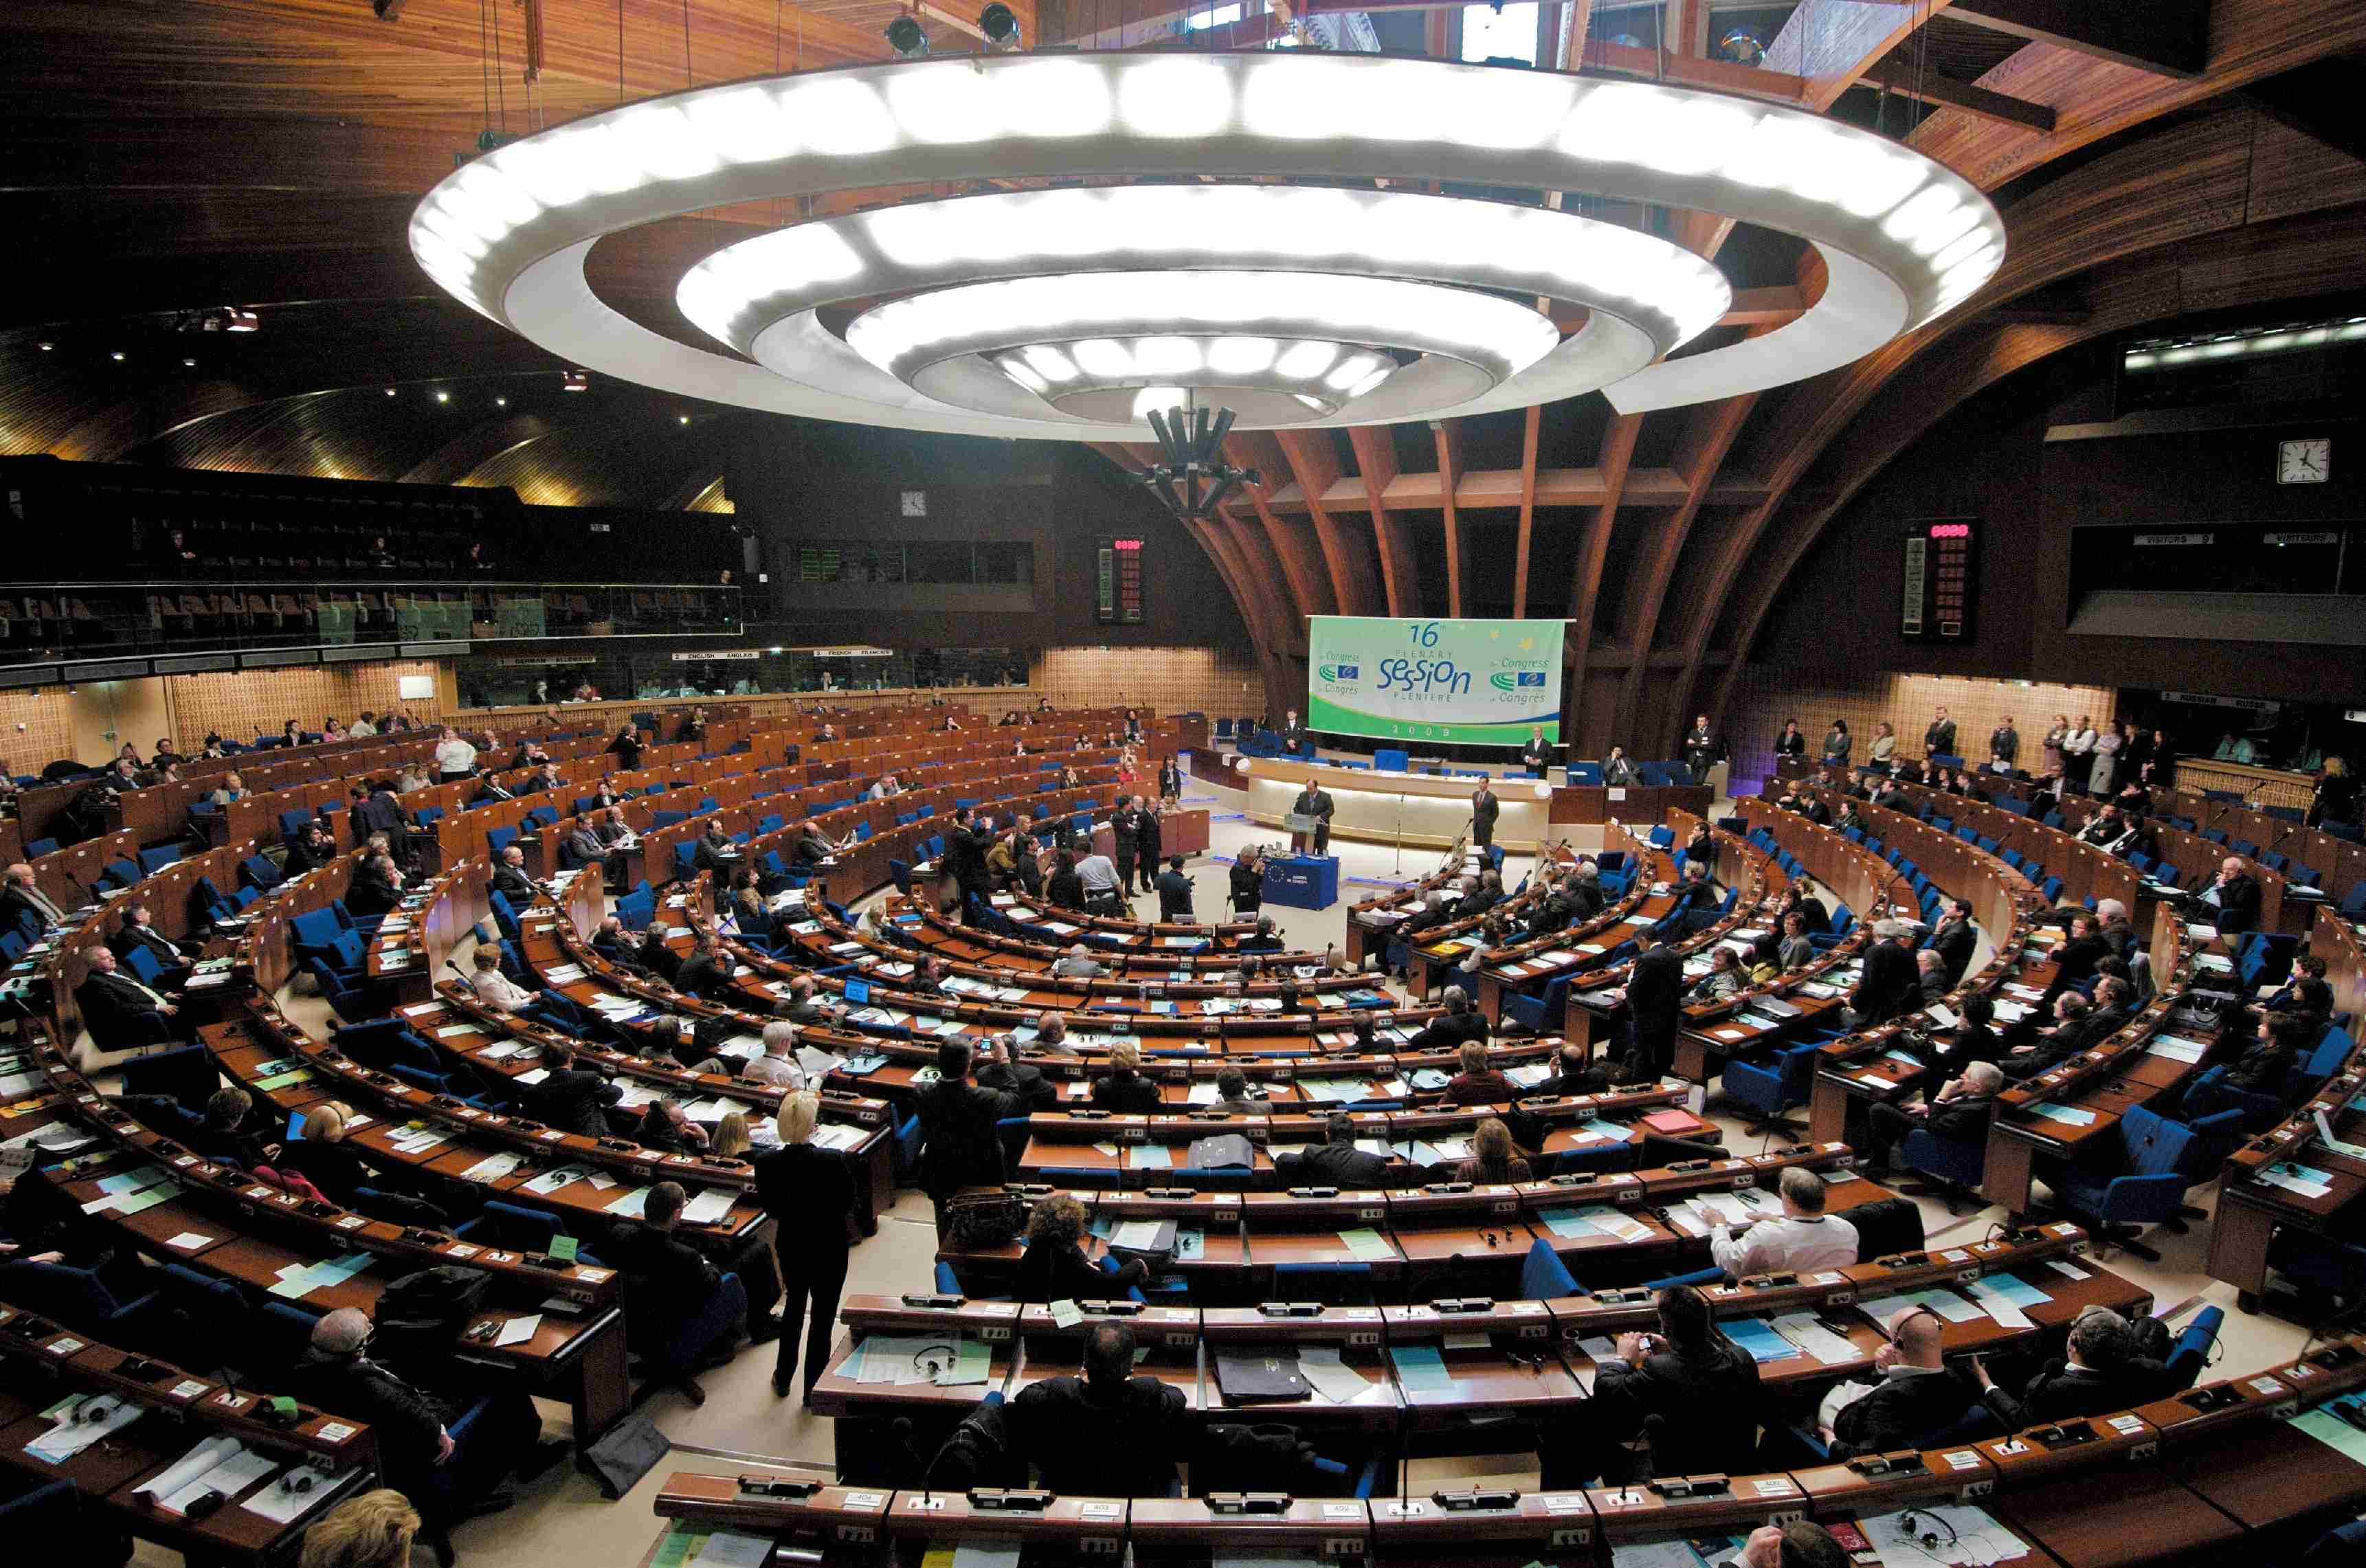 Council of Europe condemns referendum violence and urges dialogue